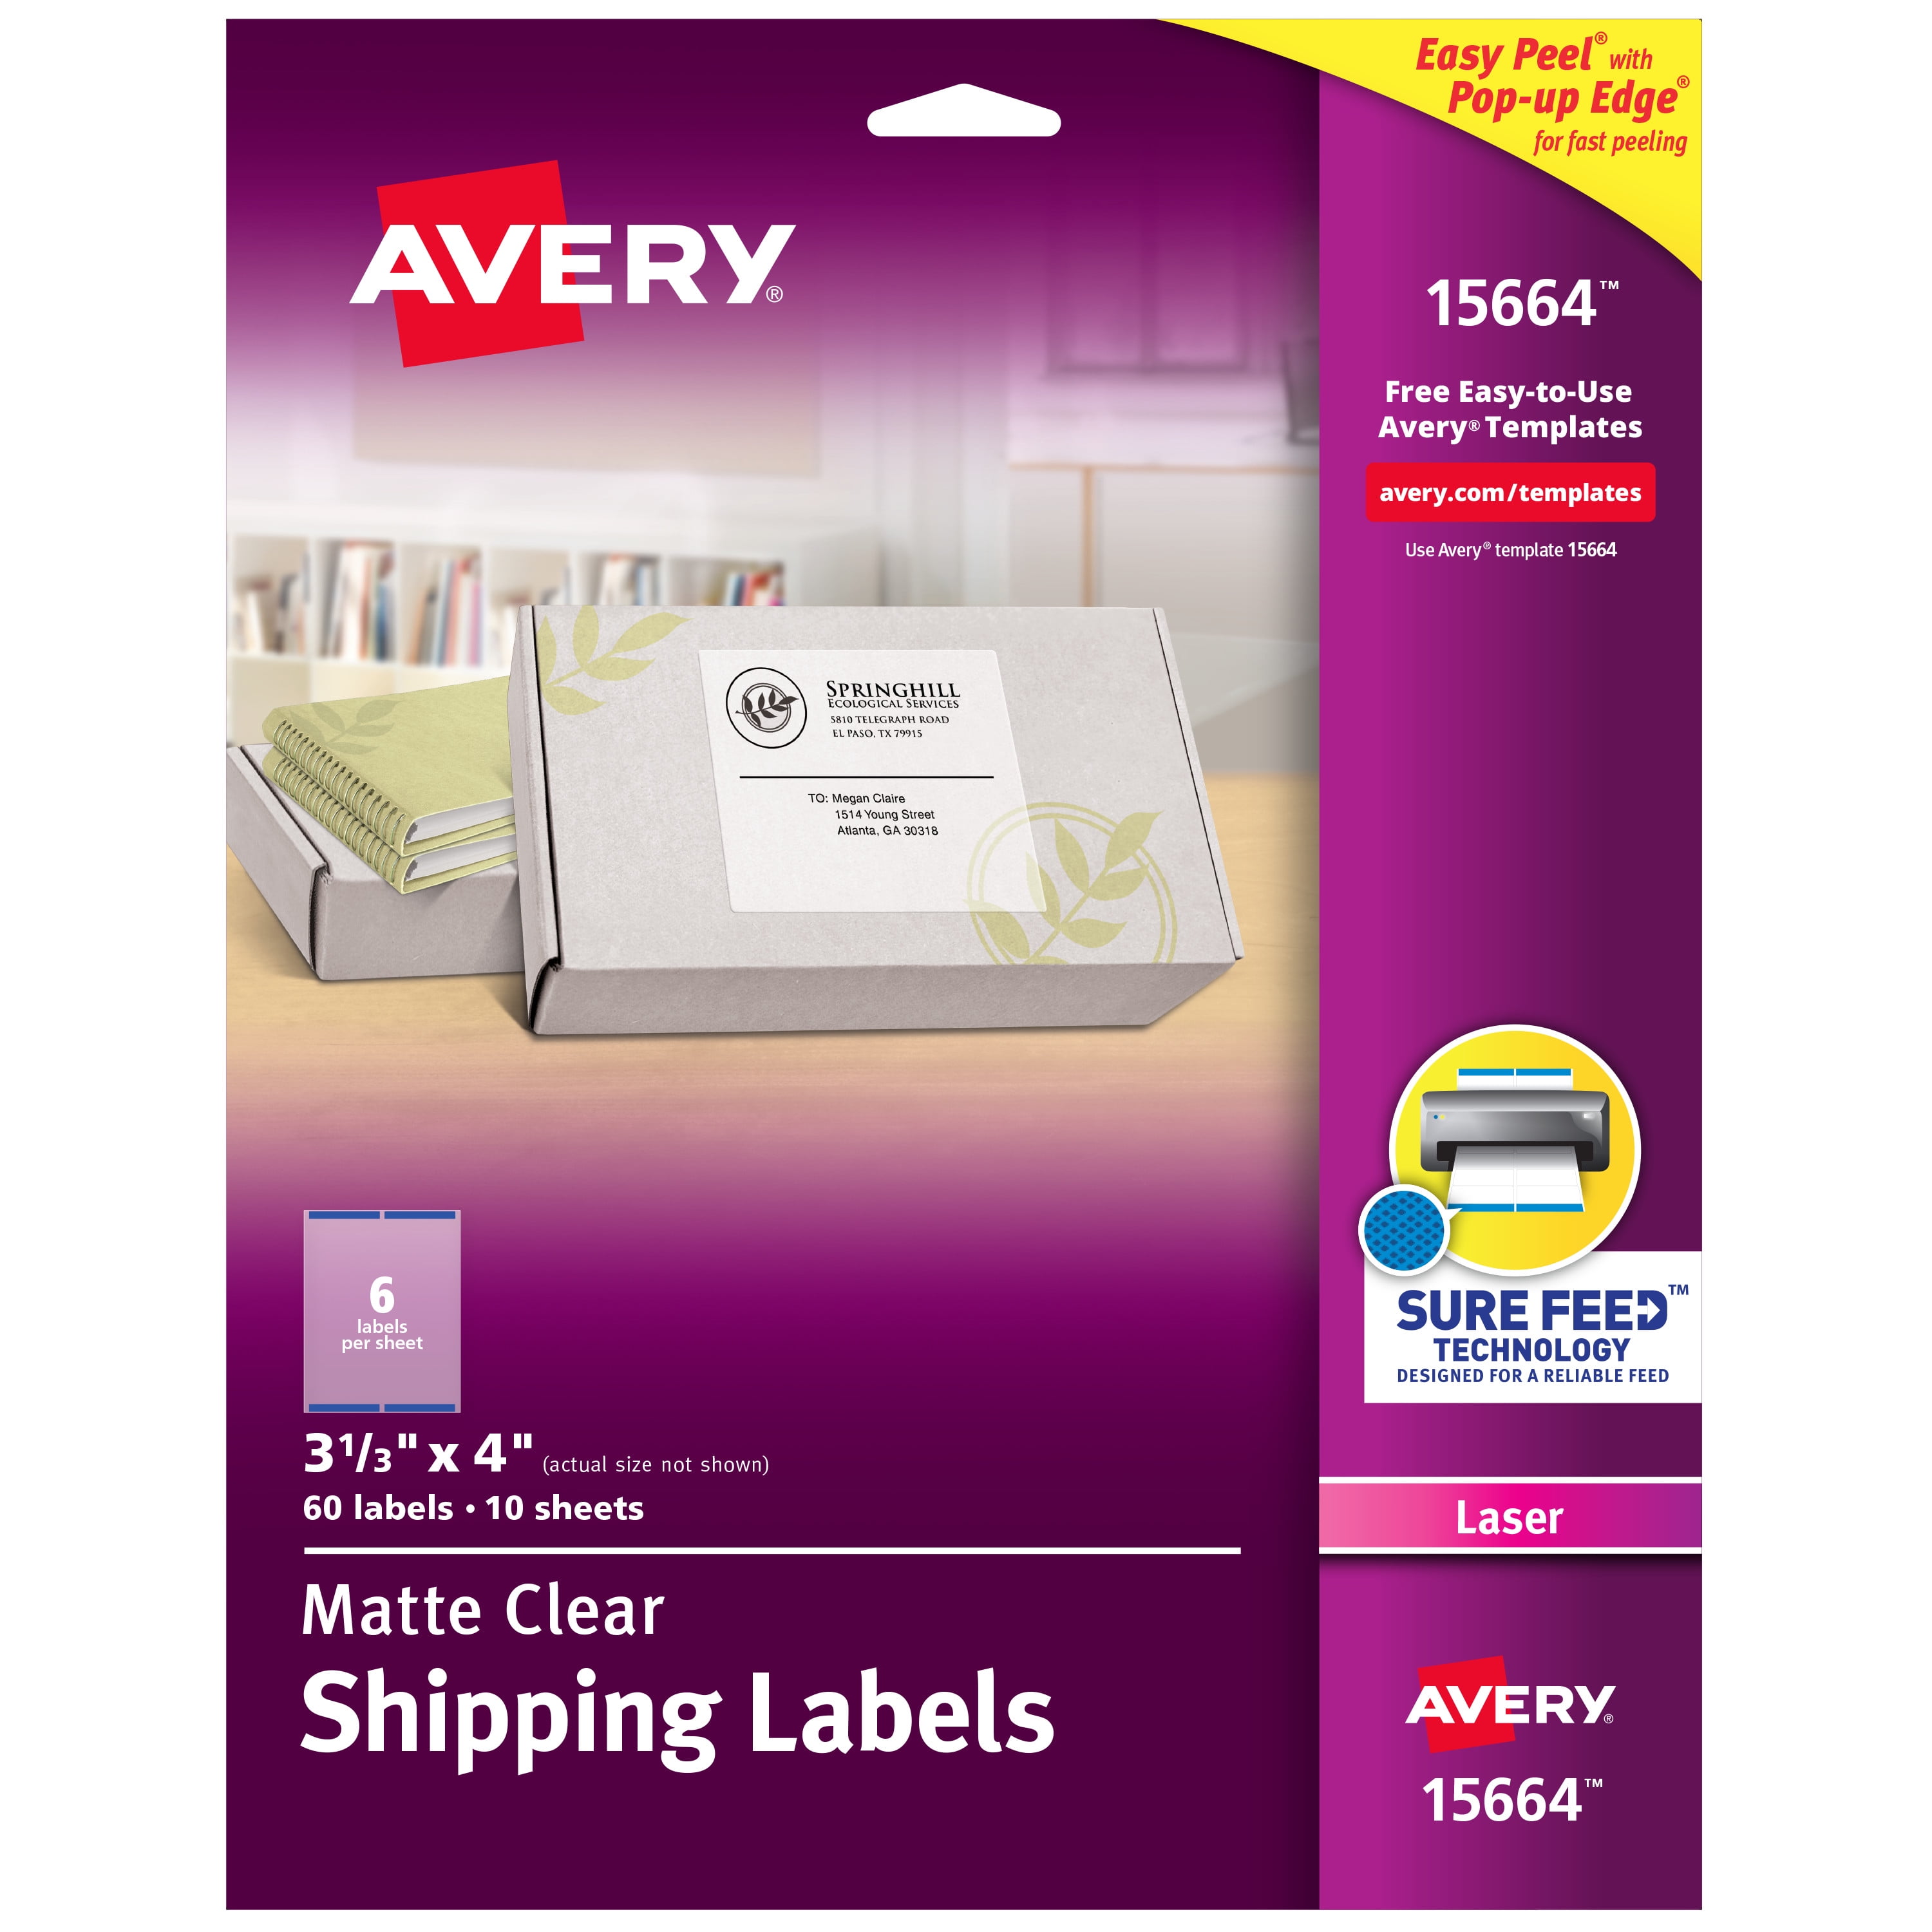 avery-matte-clear-shipping-labels-sure-feed-technology-laser-3-1-3